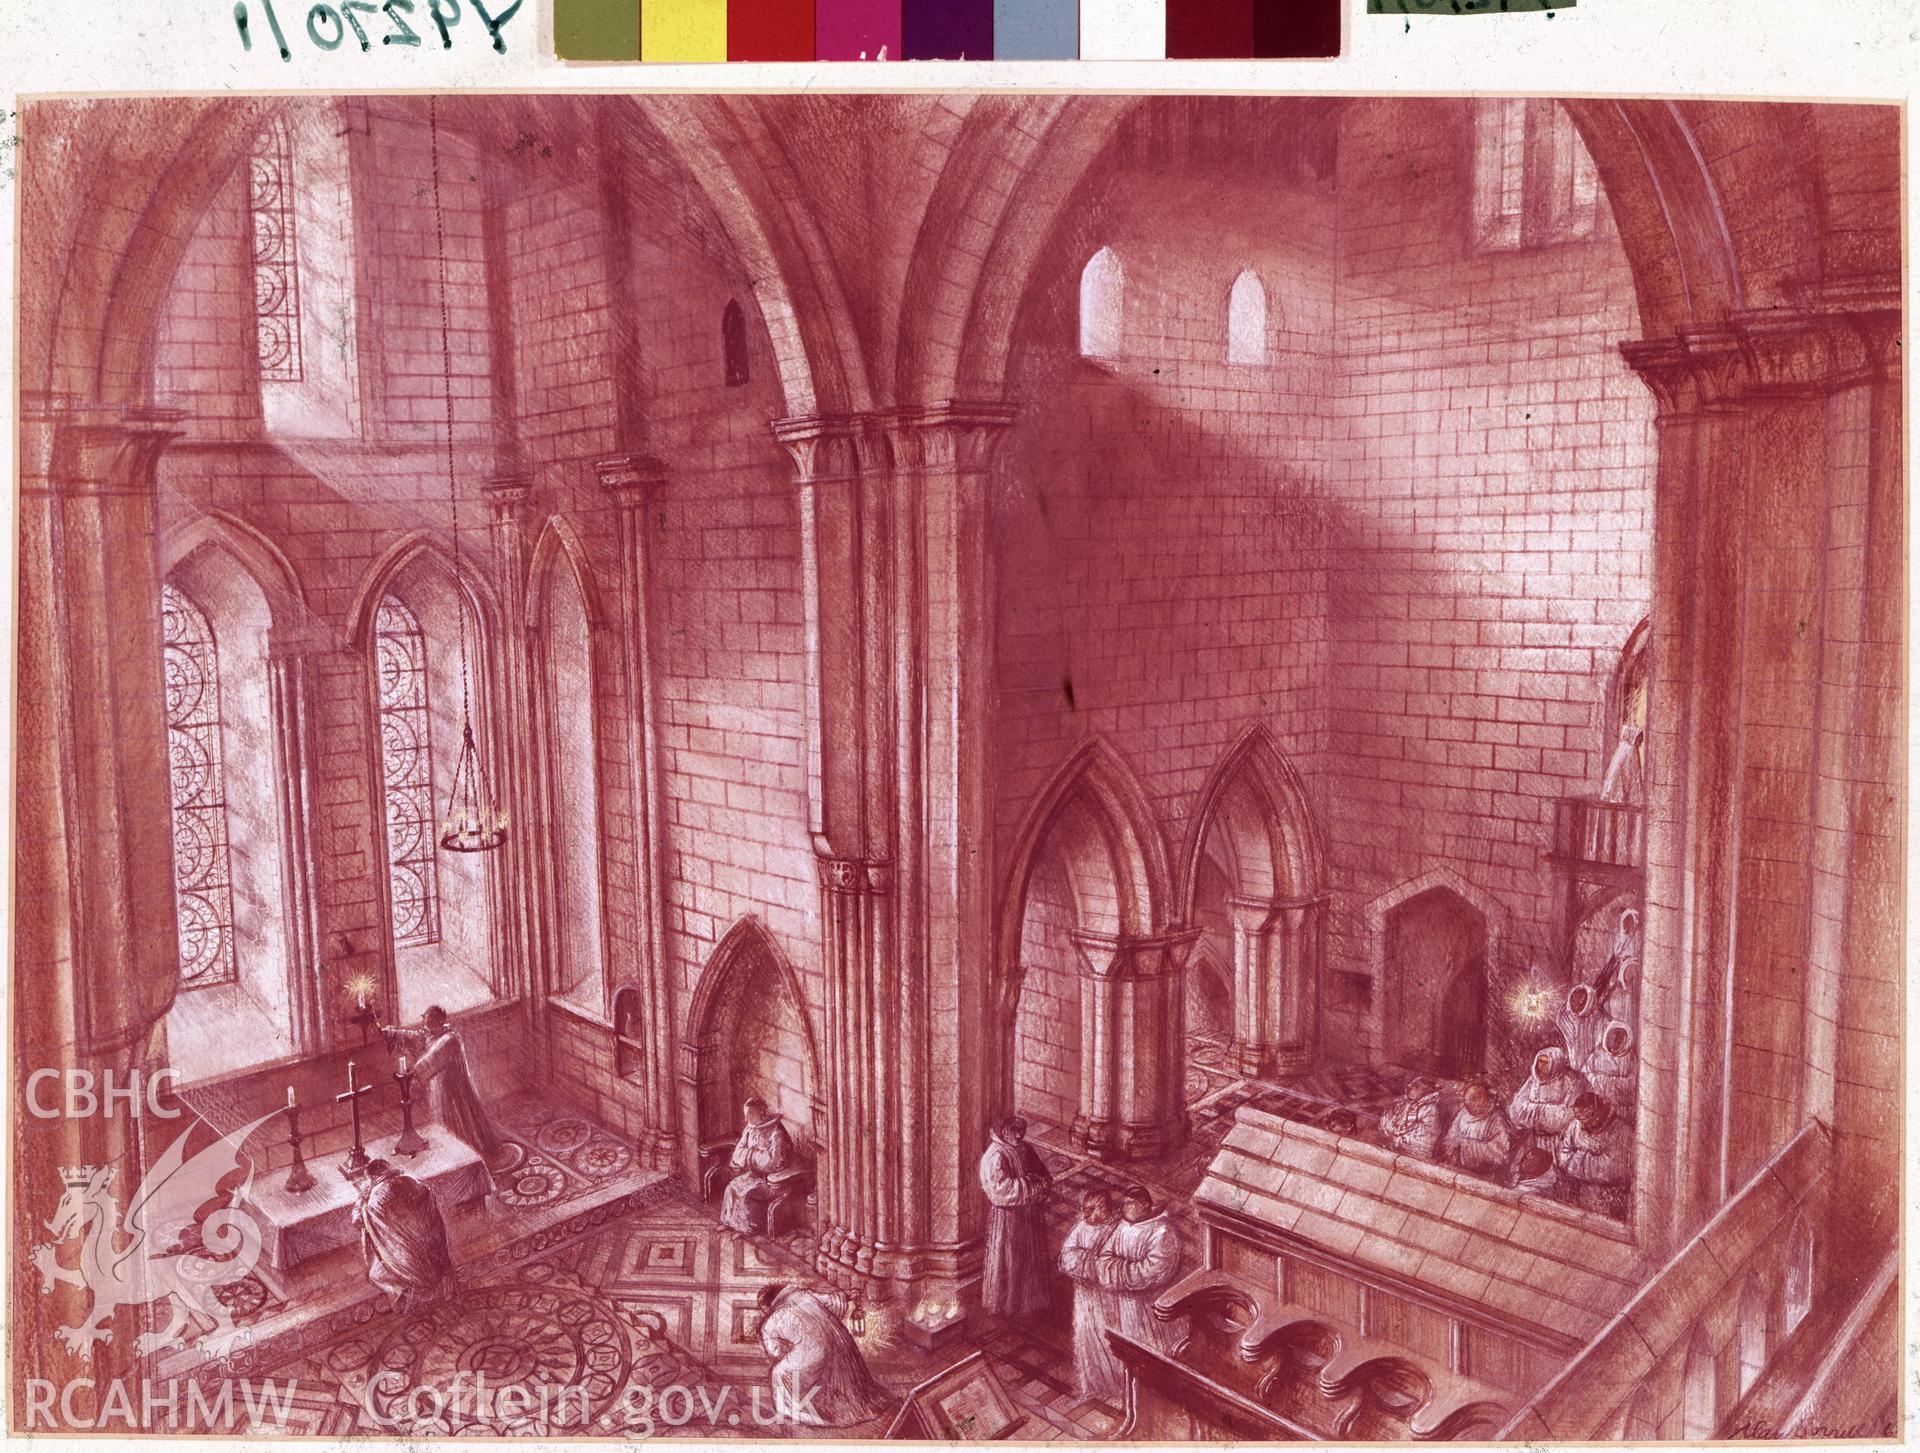 A colour negative image of an Alan Sorrell reconstruction drawing of Valle Crucis Abbey.